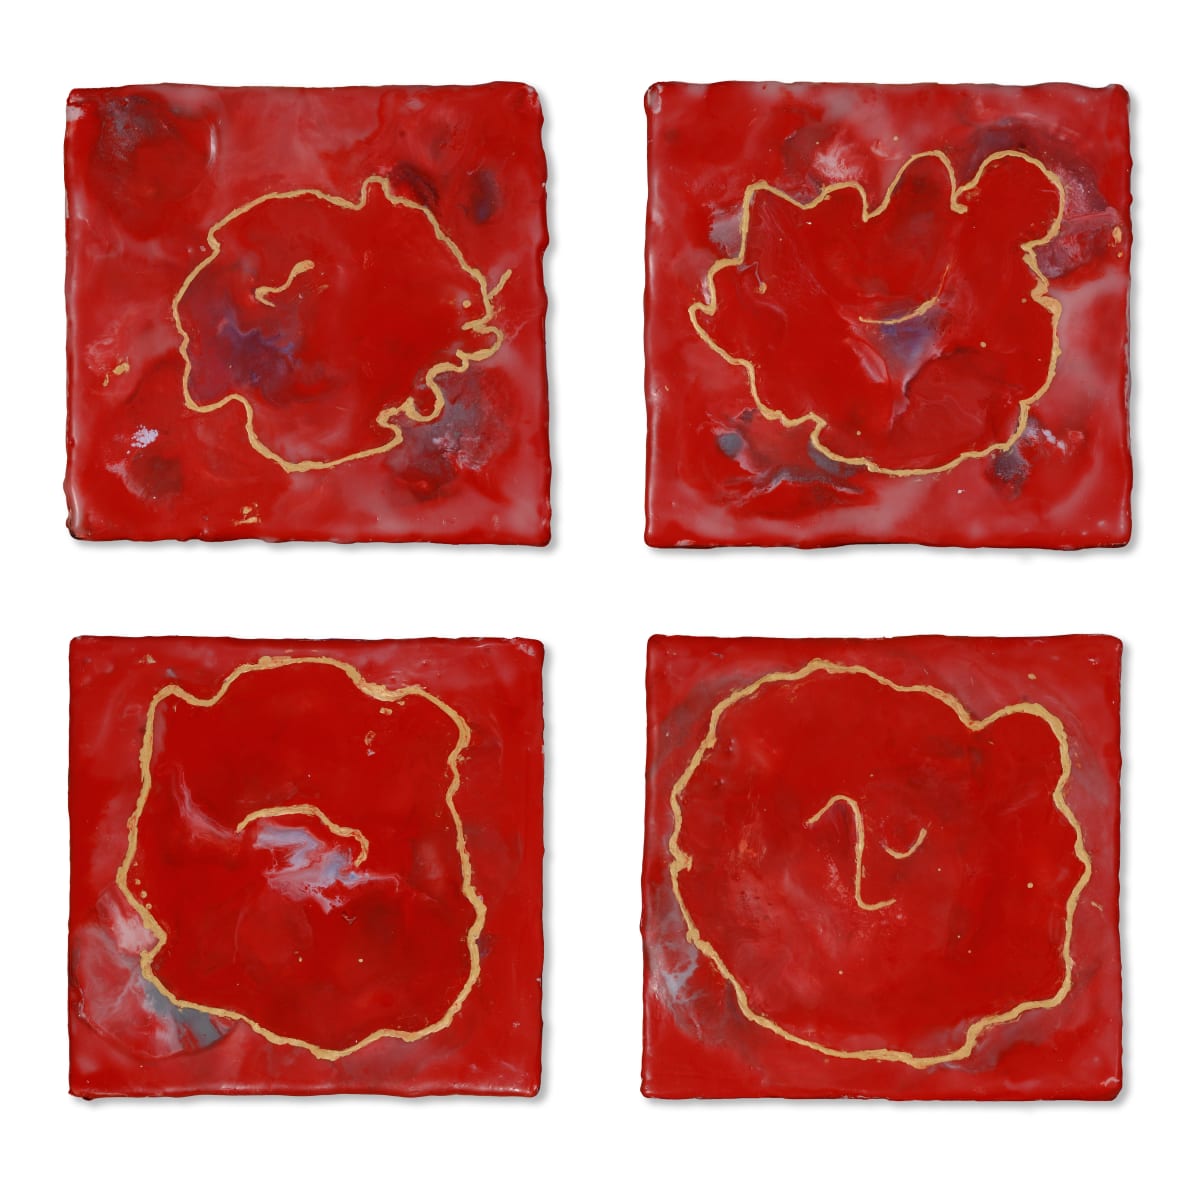 Almost Flowers by Linda Sirow  Image: Four paintings grouped, sold together